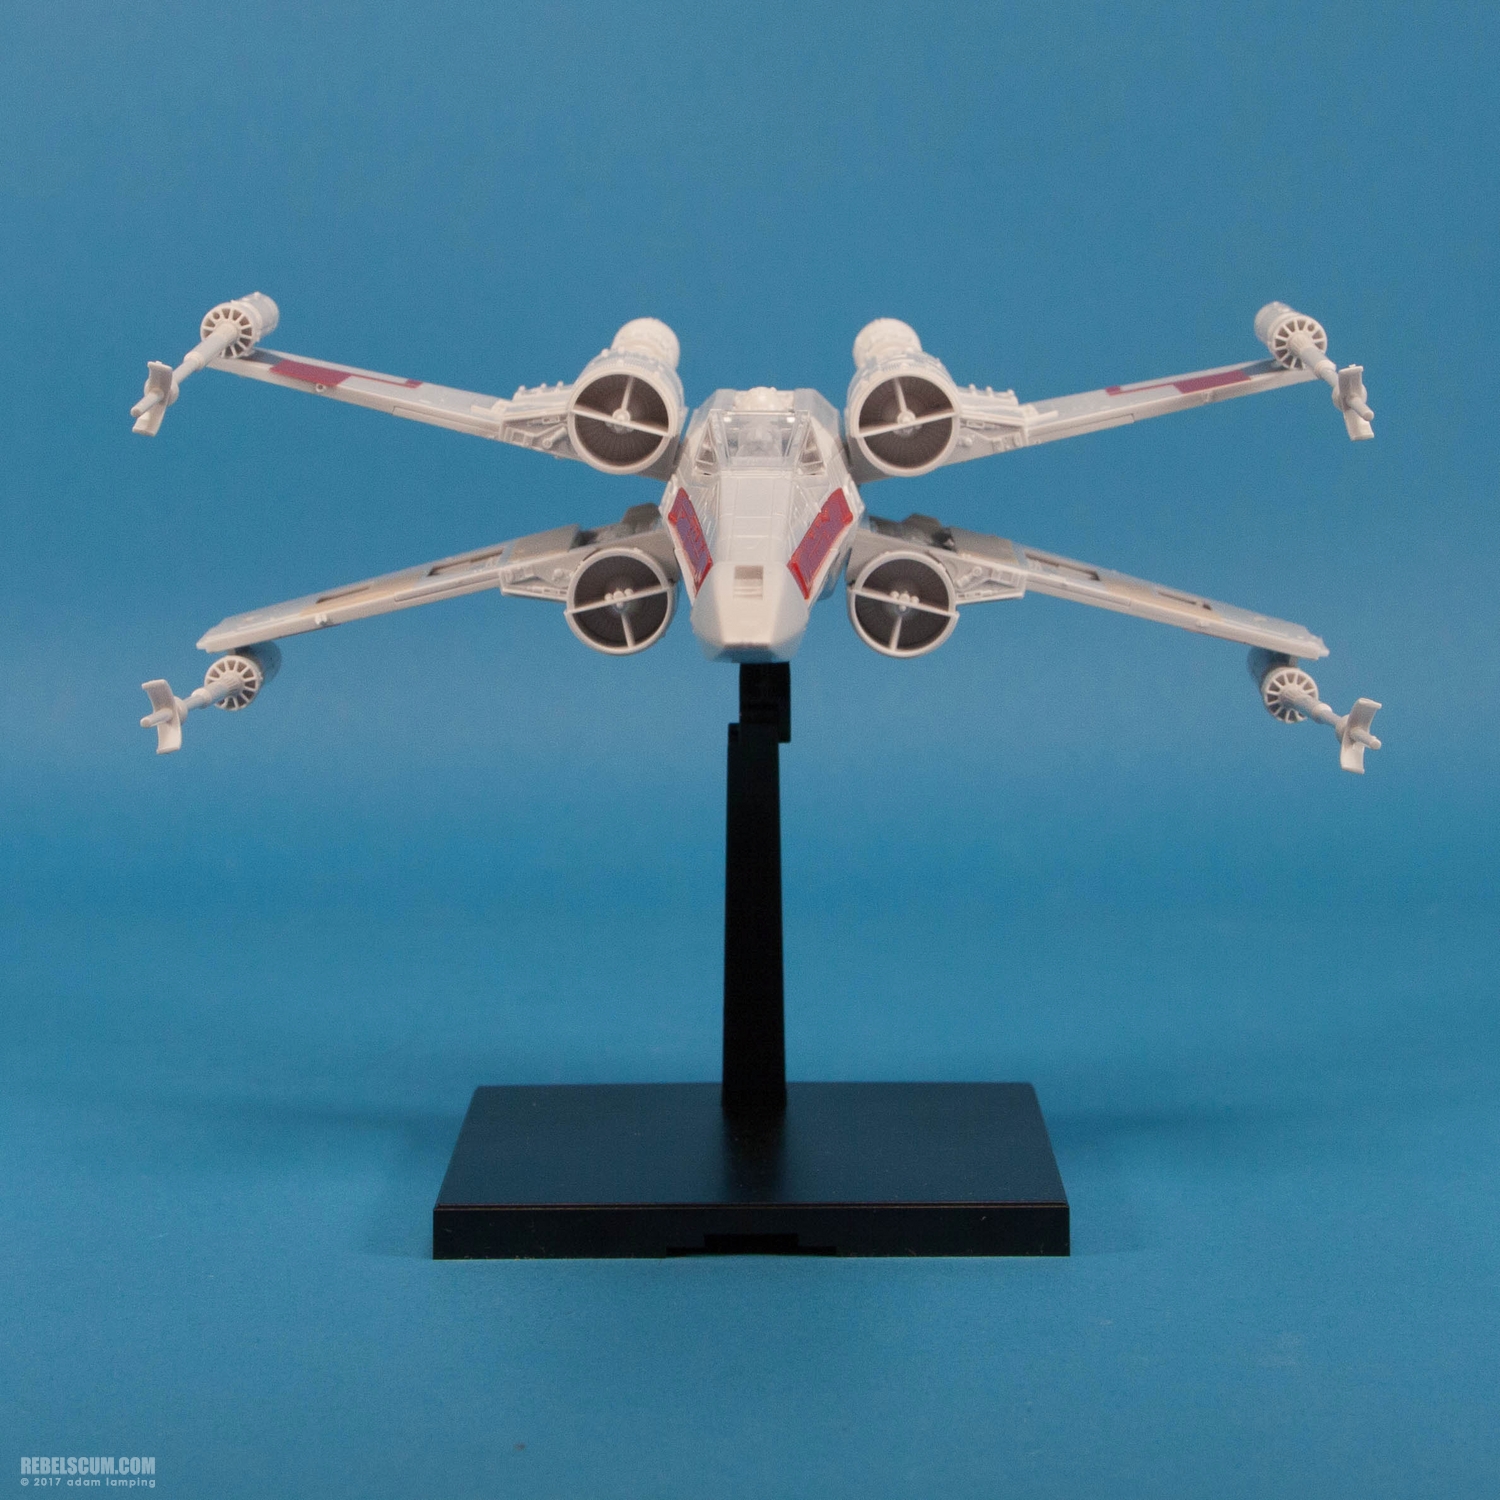 bandai-red-squadron-x-wing-starfighter-scale-model-kit-001.jpg